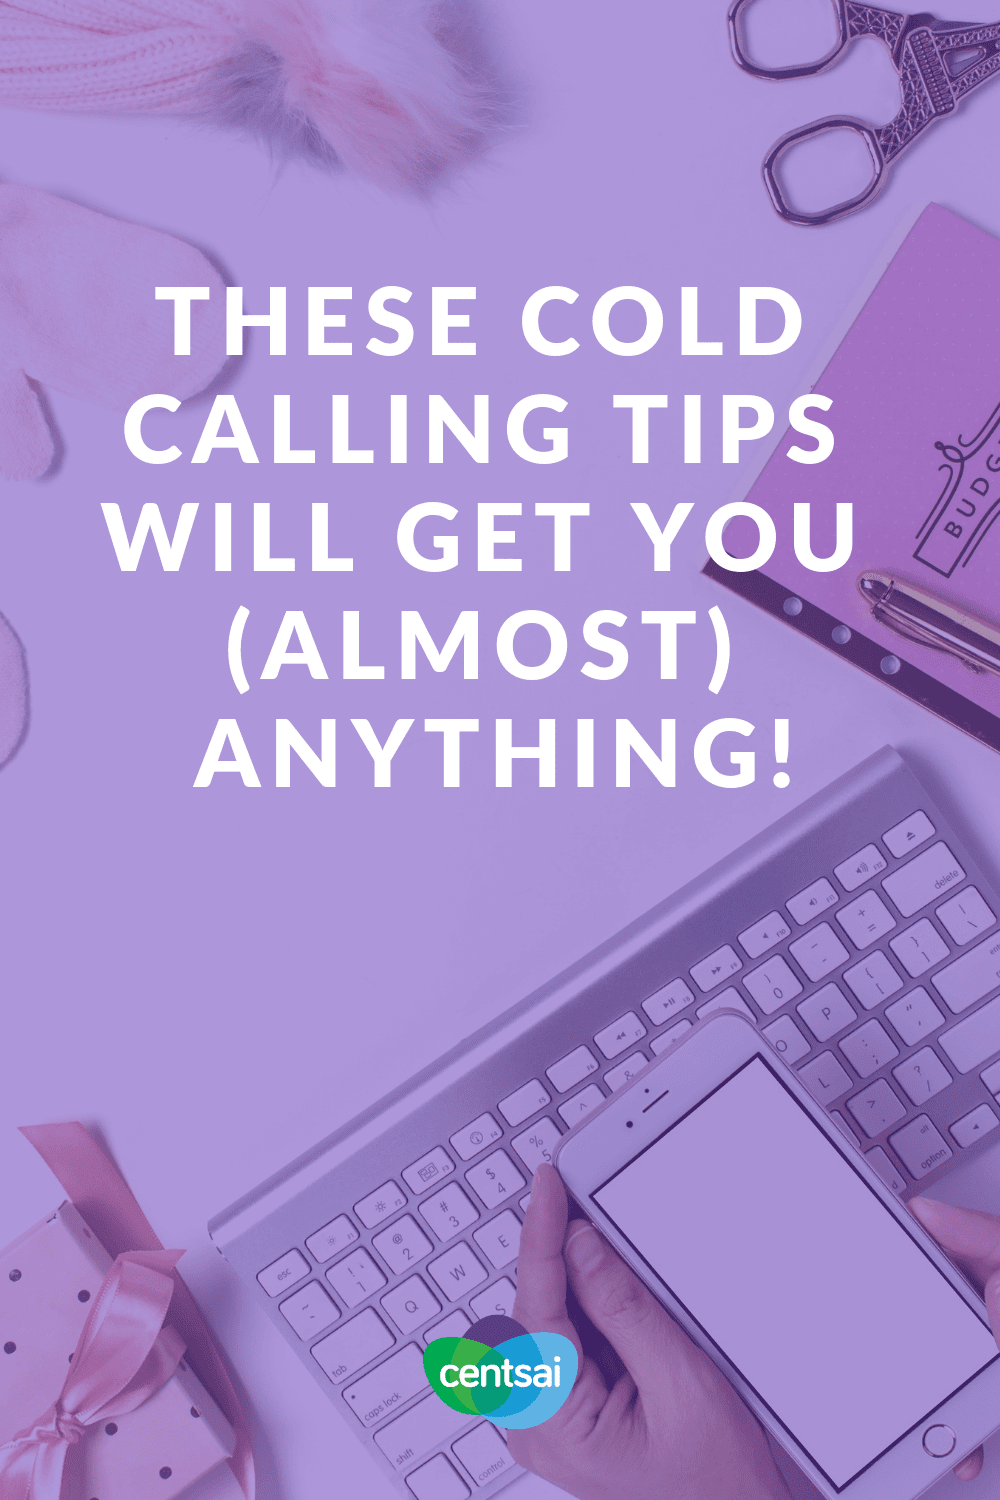 These Cold Calling Tips Will Get You (almost) Anything! Trying to get your business off the ground? Need more clients? Check out these cold calling tips to give your business the boost it needs. #coldcallingtips #business